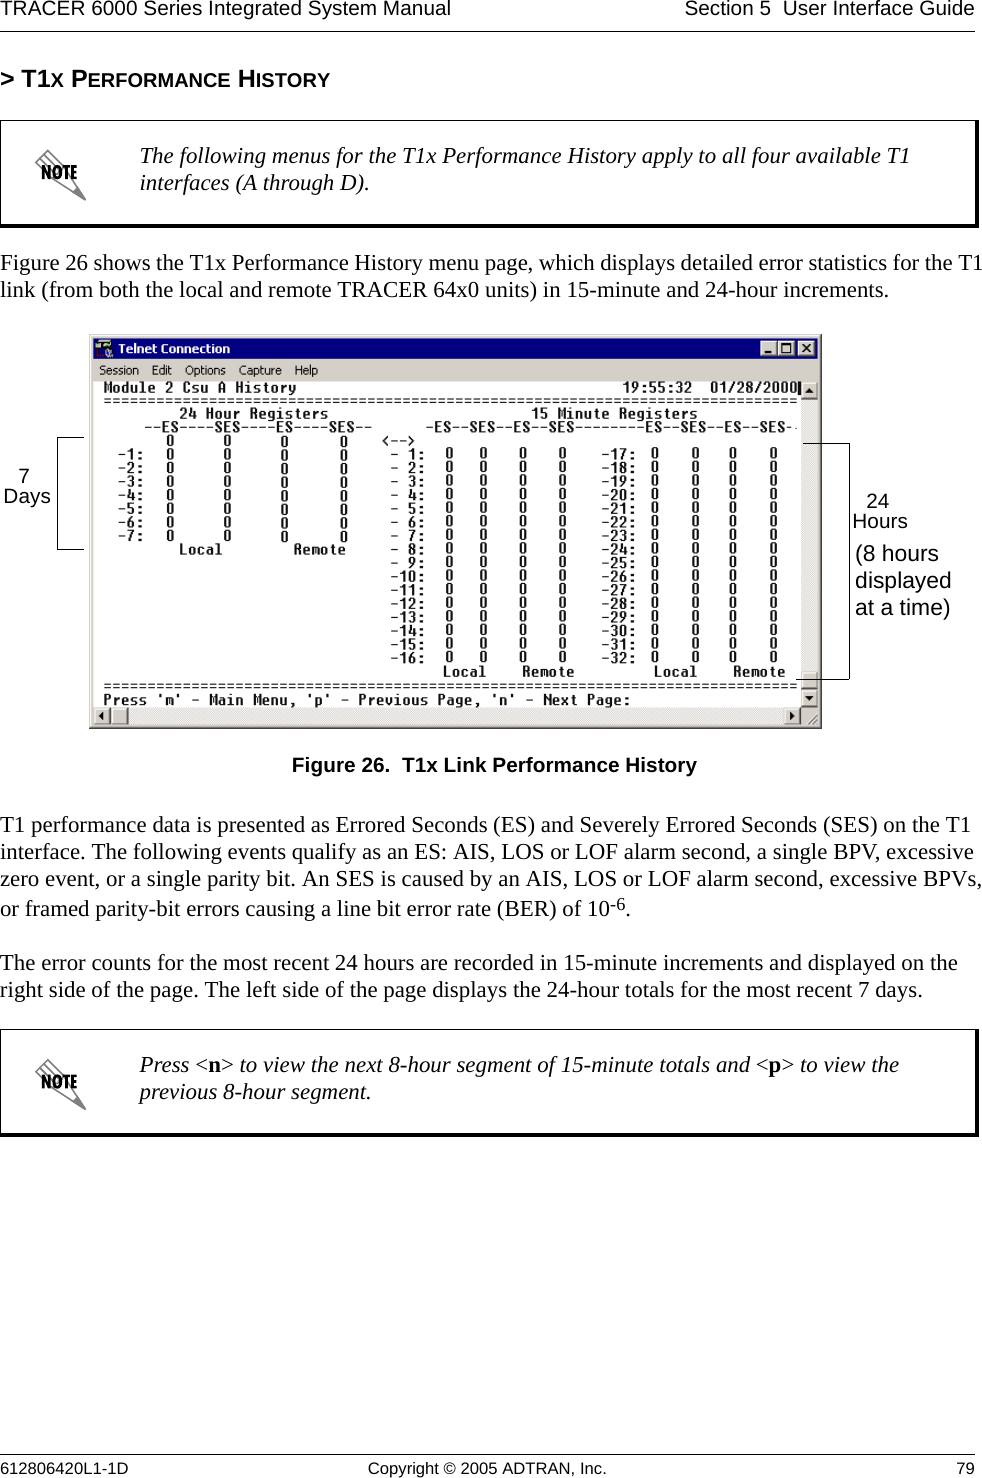 TRACER 6000 Series Integrated System Manual Section 5  User Interface Guide612806420L1-1D Copyright © 2005 ADTRAN, Inc. 79&gt; T1X PERFORMANCE HISTORYFigure 26 shows the T1x Performance History menu page, which displays detailed error statistics for the T1 link (from both the local and remote TRACER 64x0 units) in 15-minute and 24-hour increments.Figure 26.  T1x Link Performance HistoryT1 performance data is presented as Errored Seconds (ES) and Severely Errored Seconds (SES) on the T1 interface. The following events qualify as an ES: AIS, LOS or LOF alarm second, a single BPV, excessive zero event, or a single parity bit. An SES is caused by an AIS, LOS or LOF alarm second, excessive BPVs, or framed parity-bit errors causing a line bit error rate (BER) of 10-6.The error counts for the most recent 24 hours are recorded in 15-minute increments and displayed on the right side of the page. The left side of the page displays the 24-hour totals for the most recent 7 days.The following menus for the T1x Performance History apply to all four available T1 interfaces (A through D).Press &lt;n&gt; to view the next 8-hour segment of 15-minute totals and &lt;p&gt; to view the previous 8-hour segment.24 Hours7 Days(8 hours displayed at a time)